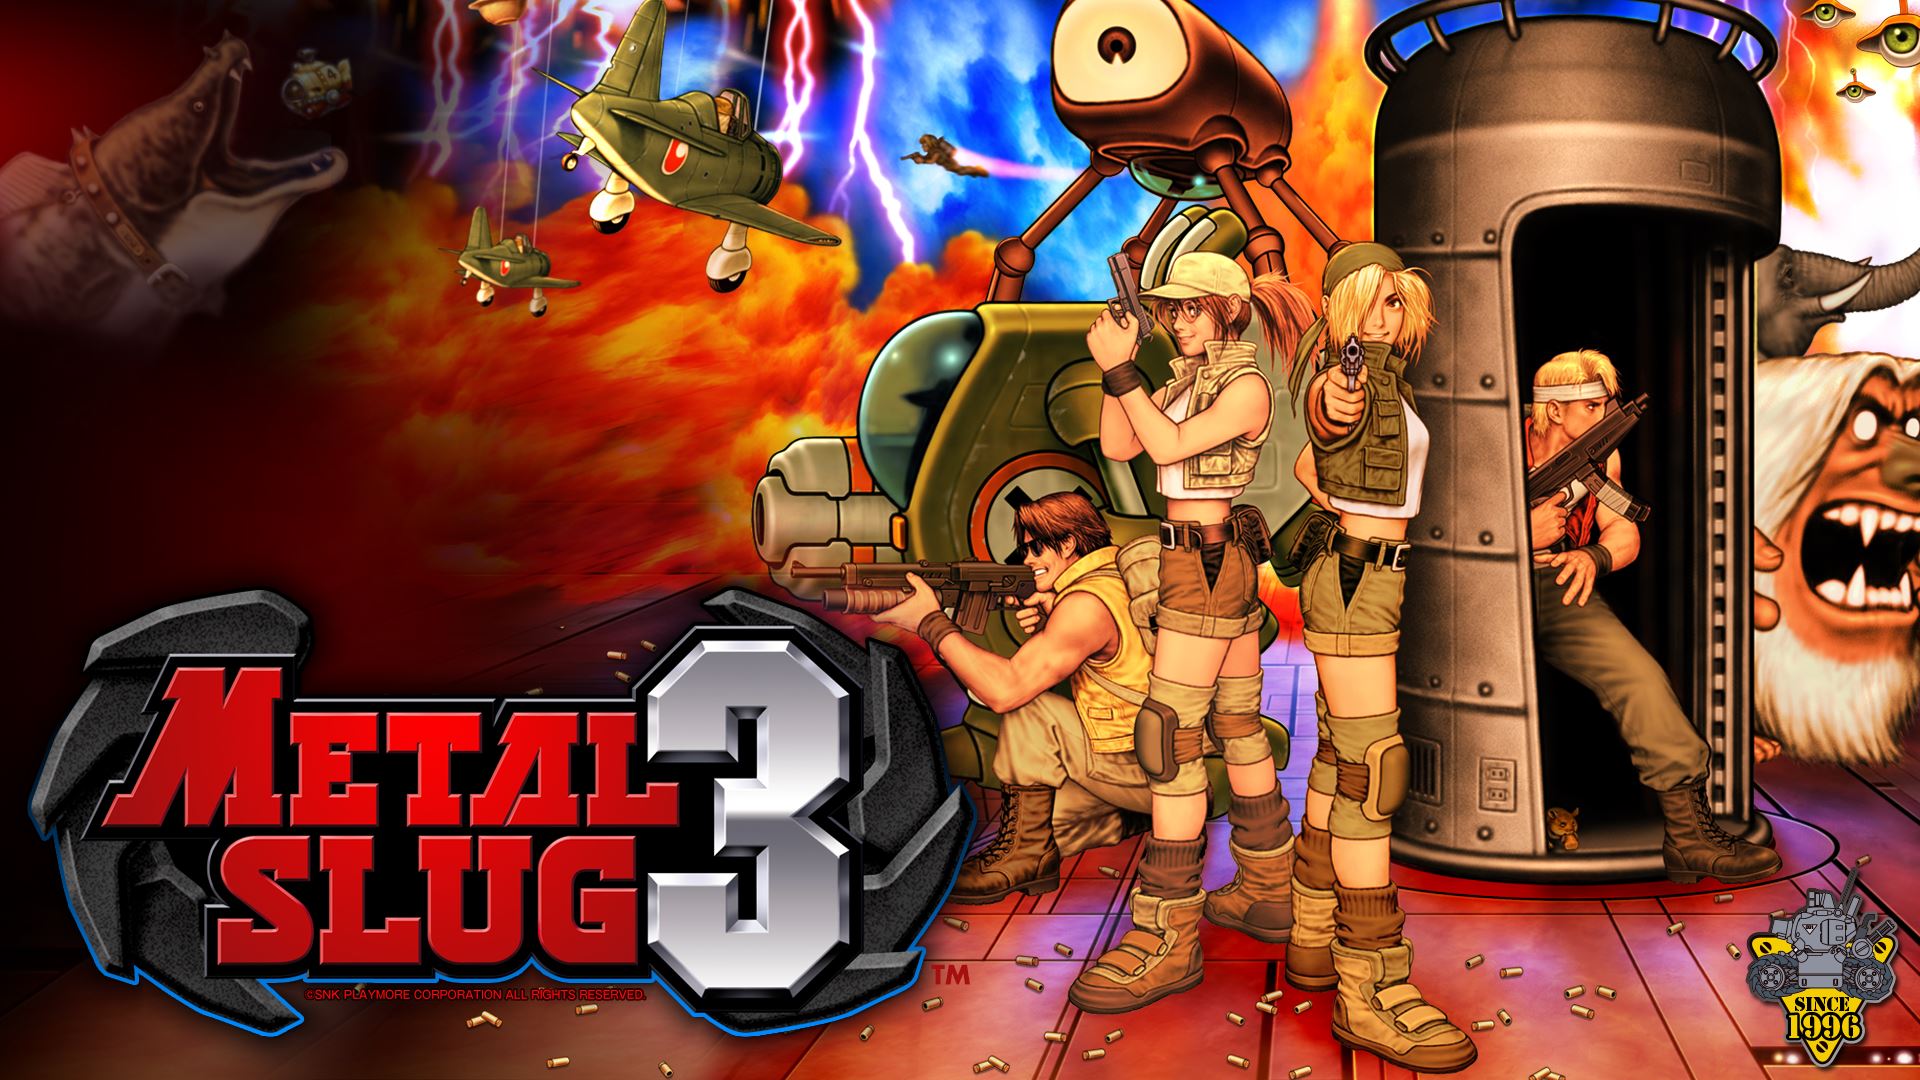 All your favorite characters are back in Metal Slug 3